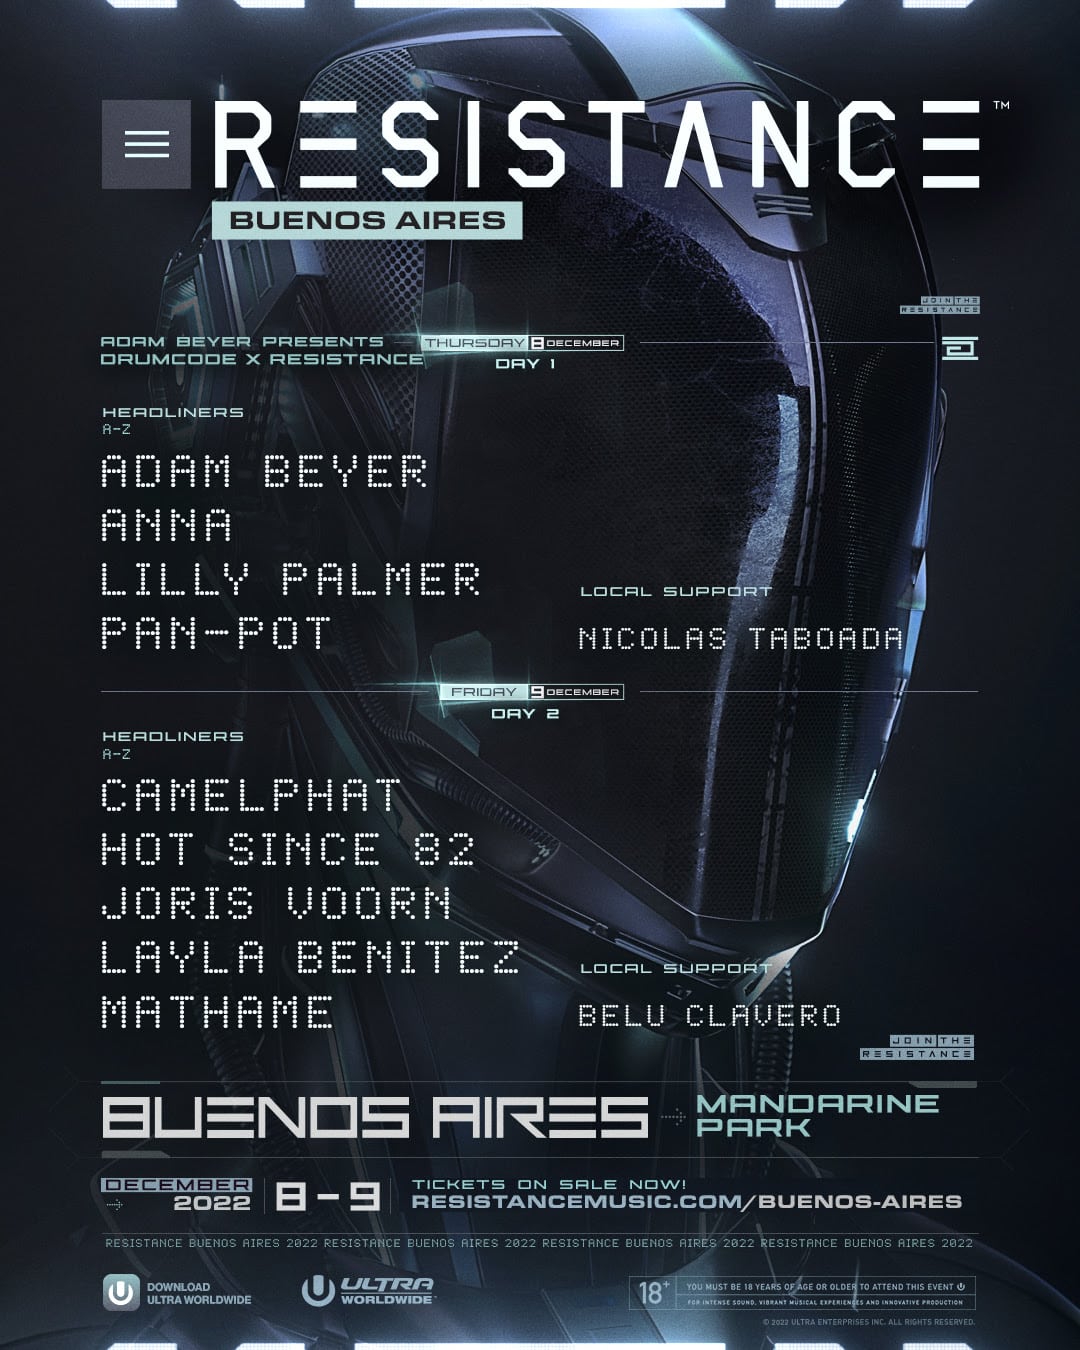 RESISTANCE Buenos Aires 2022 Lineup